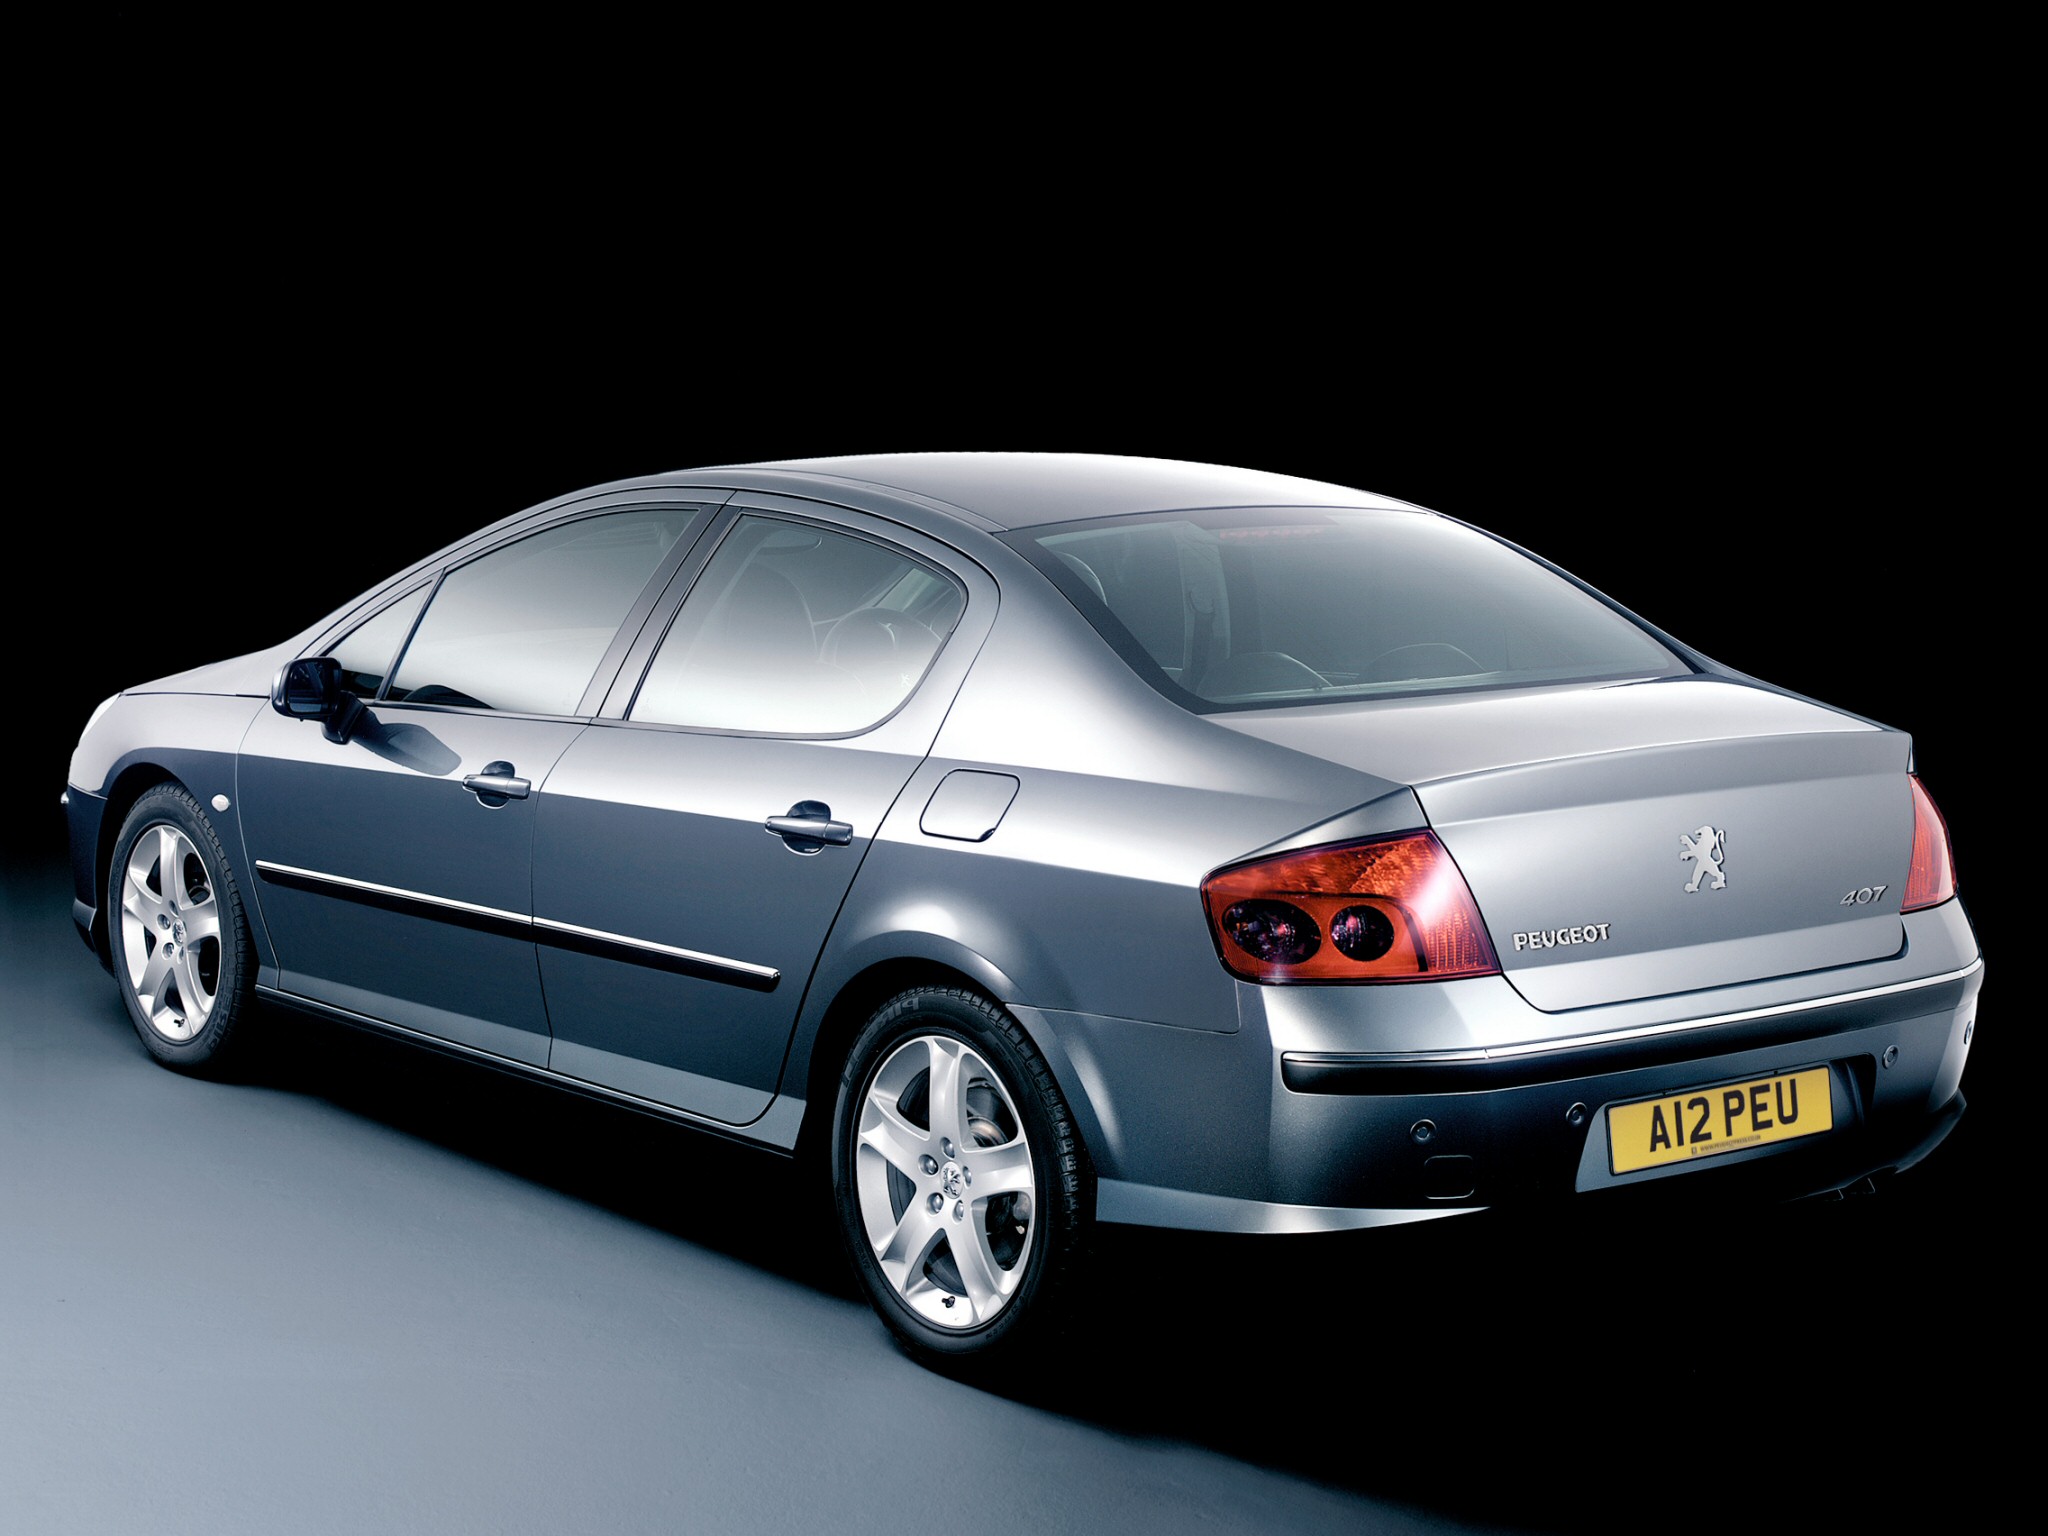 Car in pictures car photo gallery » Peugeot 407 2007